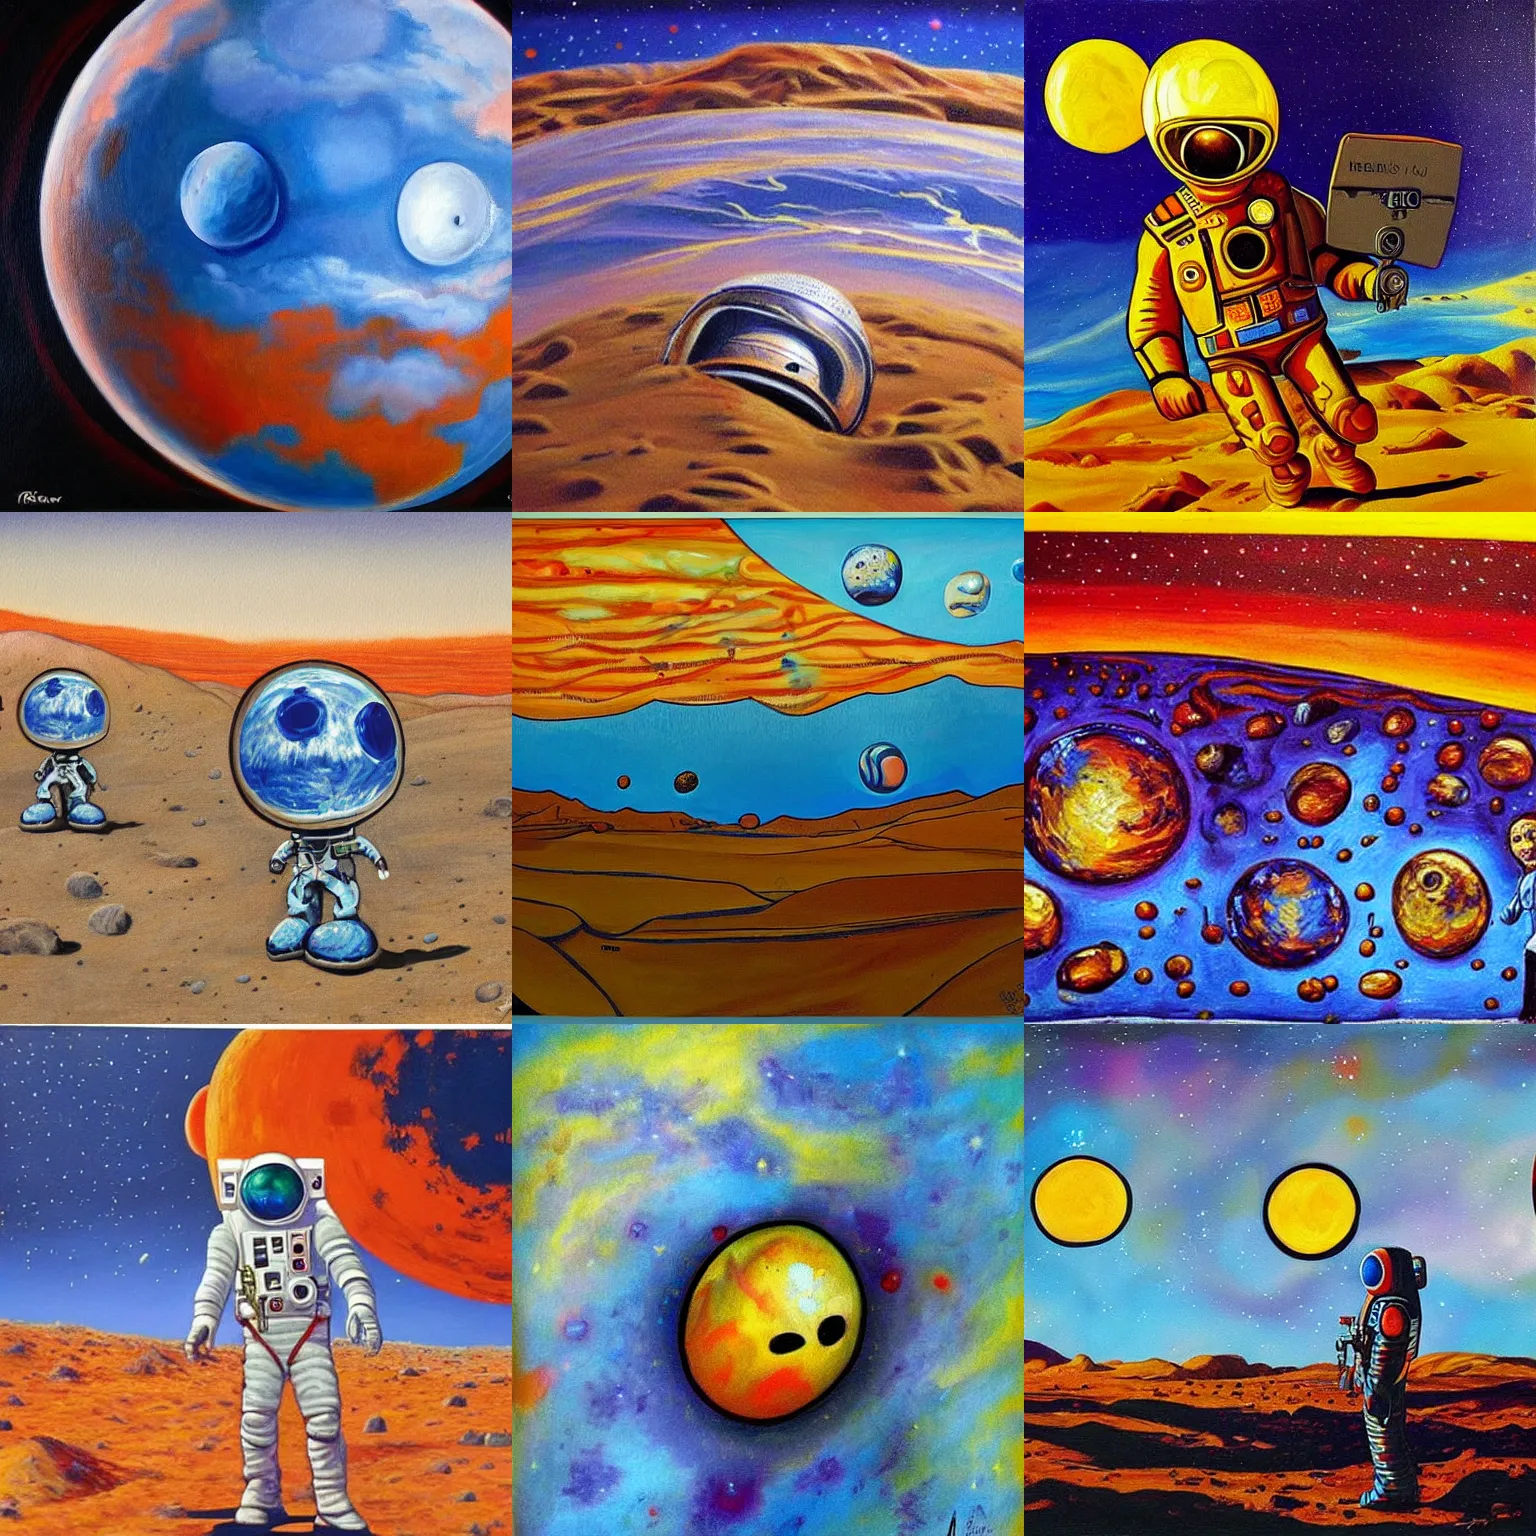 Prompt: I am a famous artist from Mars. This is my favorite painting.